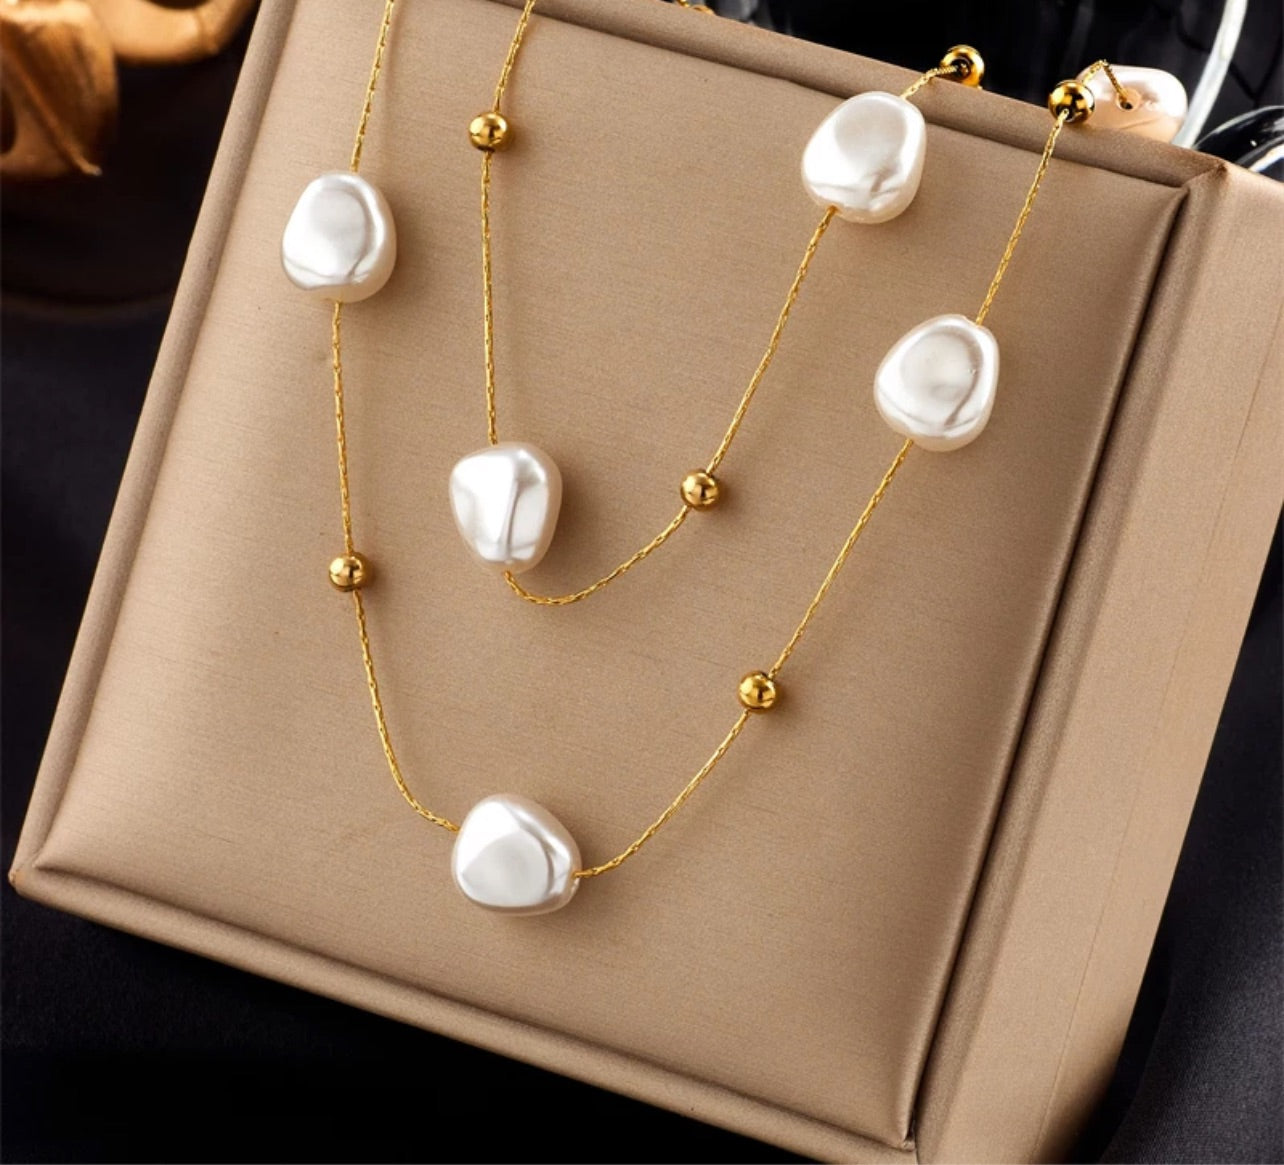 Necklace MotherPearl